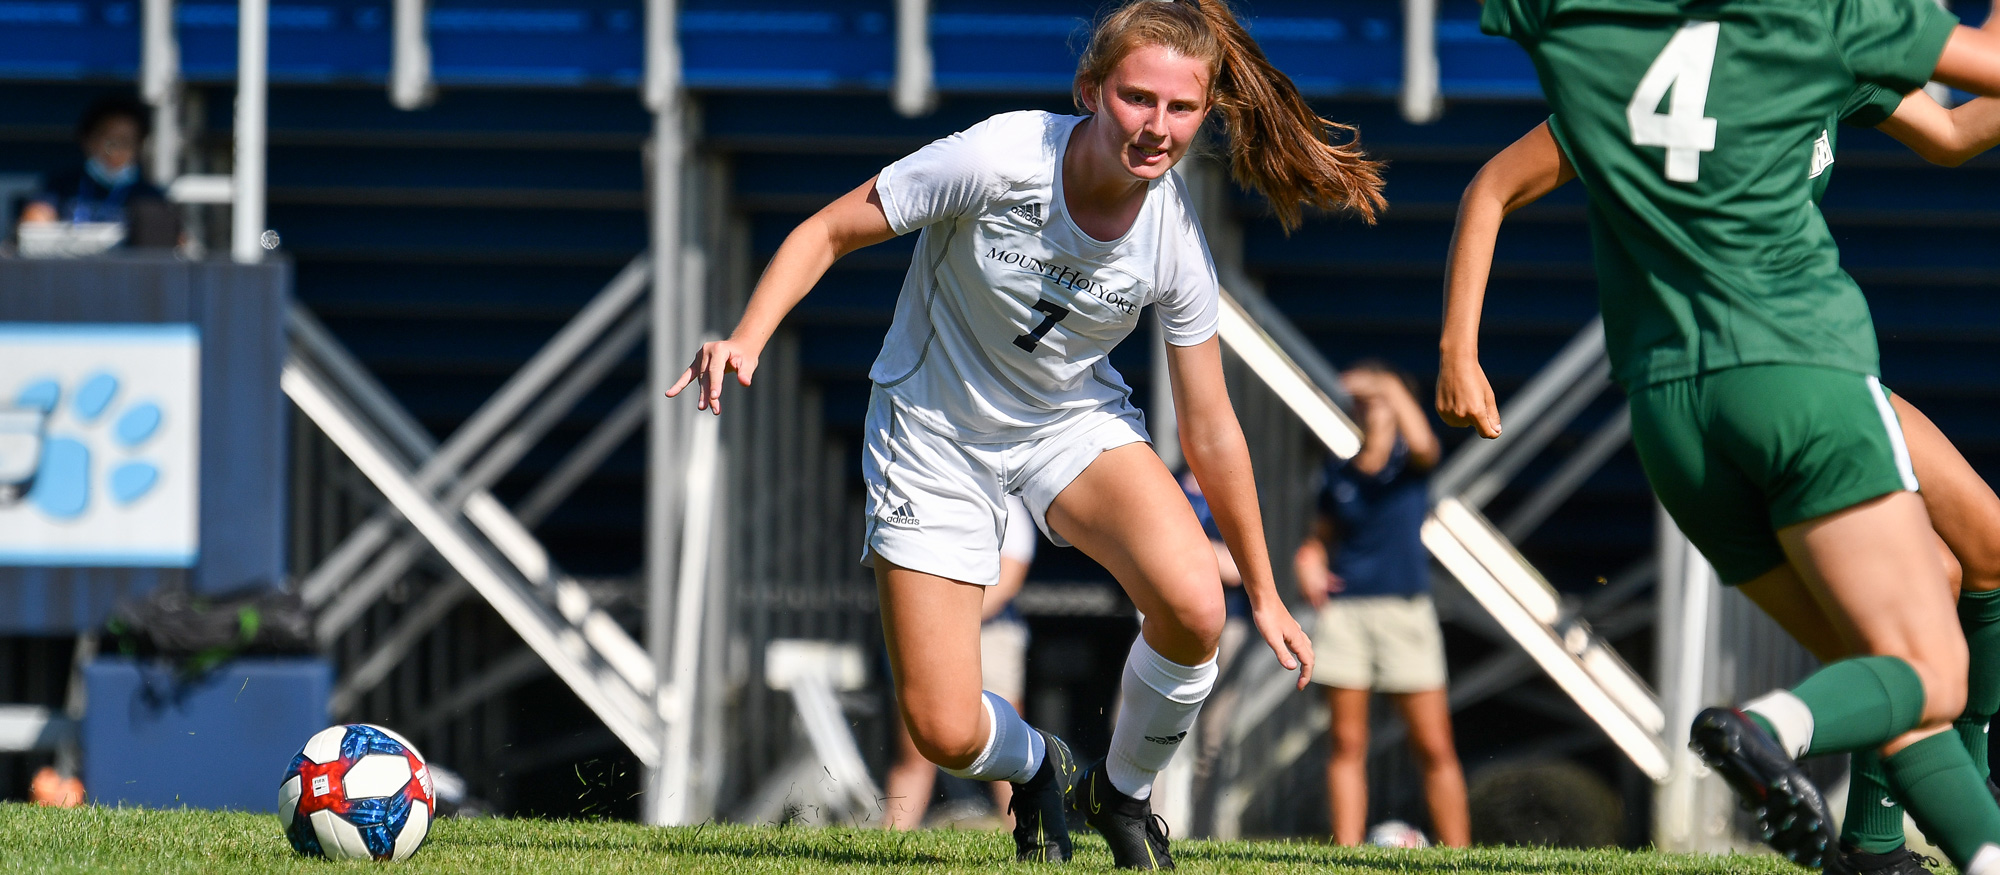 Hannah Keochakian scored three goals, all in the second half, as Mount Holyoke tied Nichols College 4-4 on Oct. 17, 2022. (RJB Sports file photo)